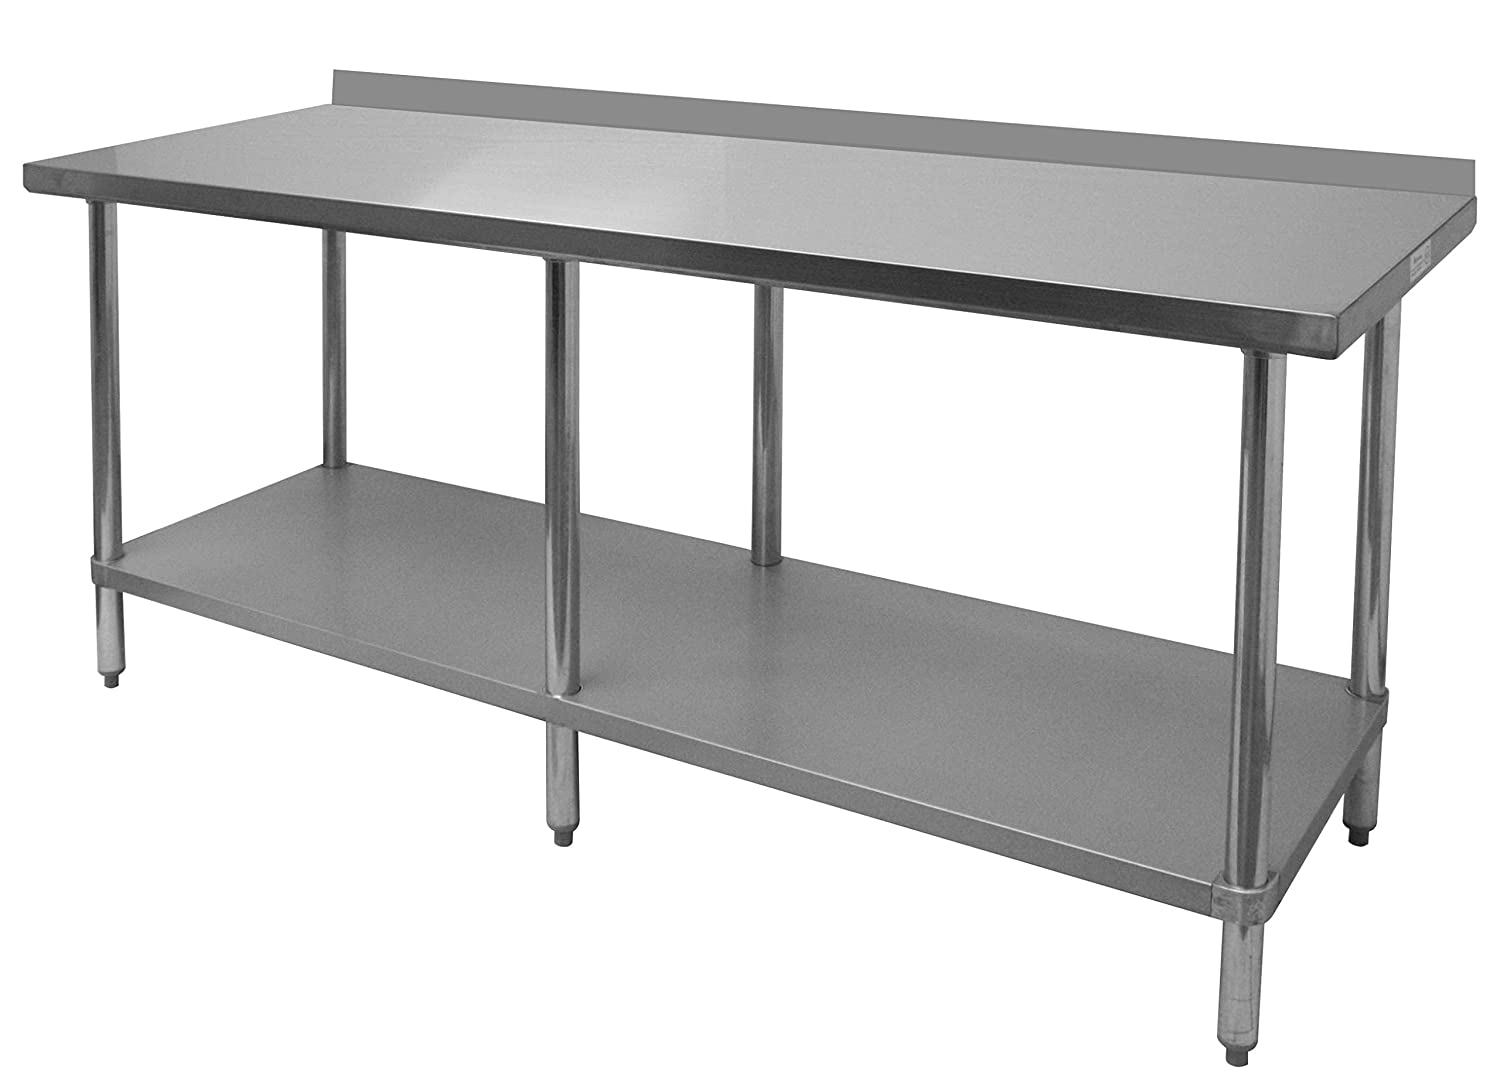 GSW Commercial Work Table with Stainless Steel Top, 1 Galvanized Undershelf, 1-1/2" Backsplash & Adjustable Bullet Feet (24"D x 84"L x 35"H)